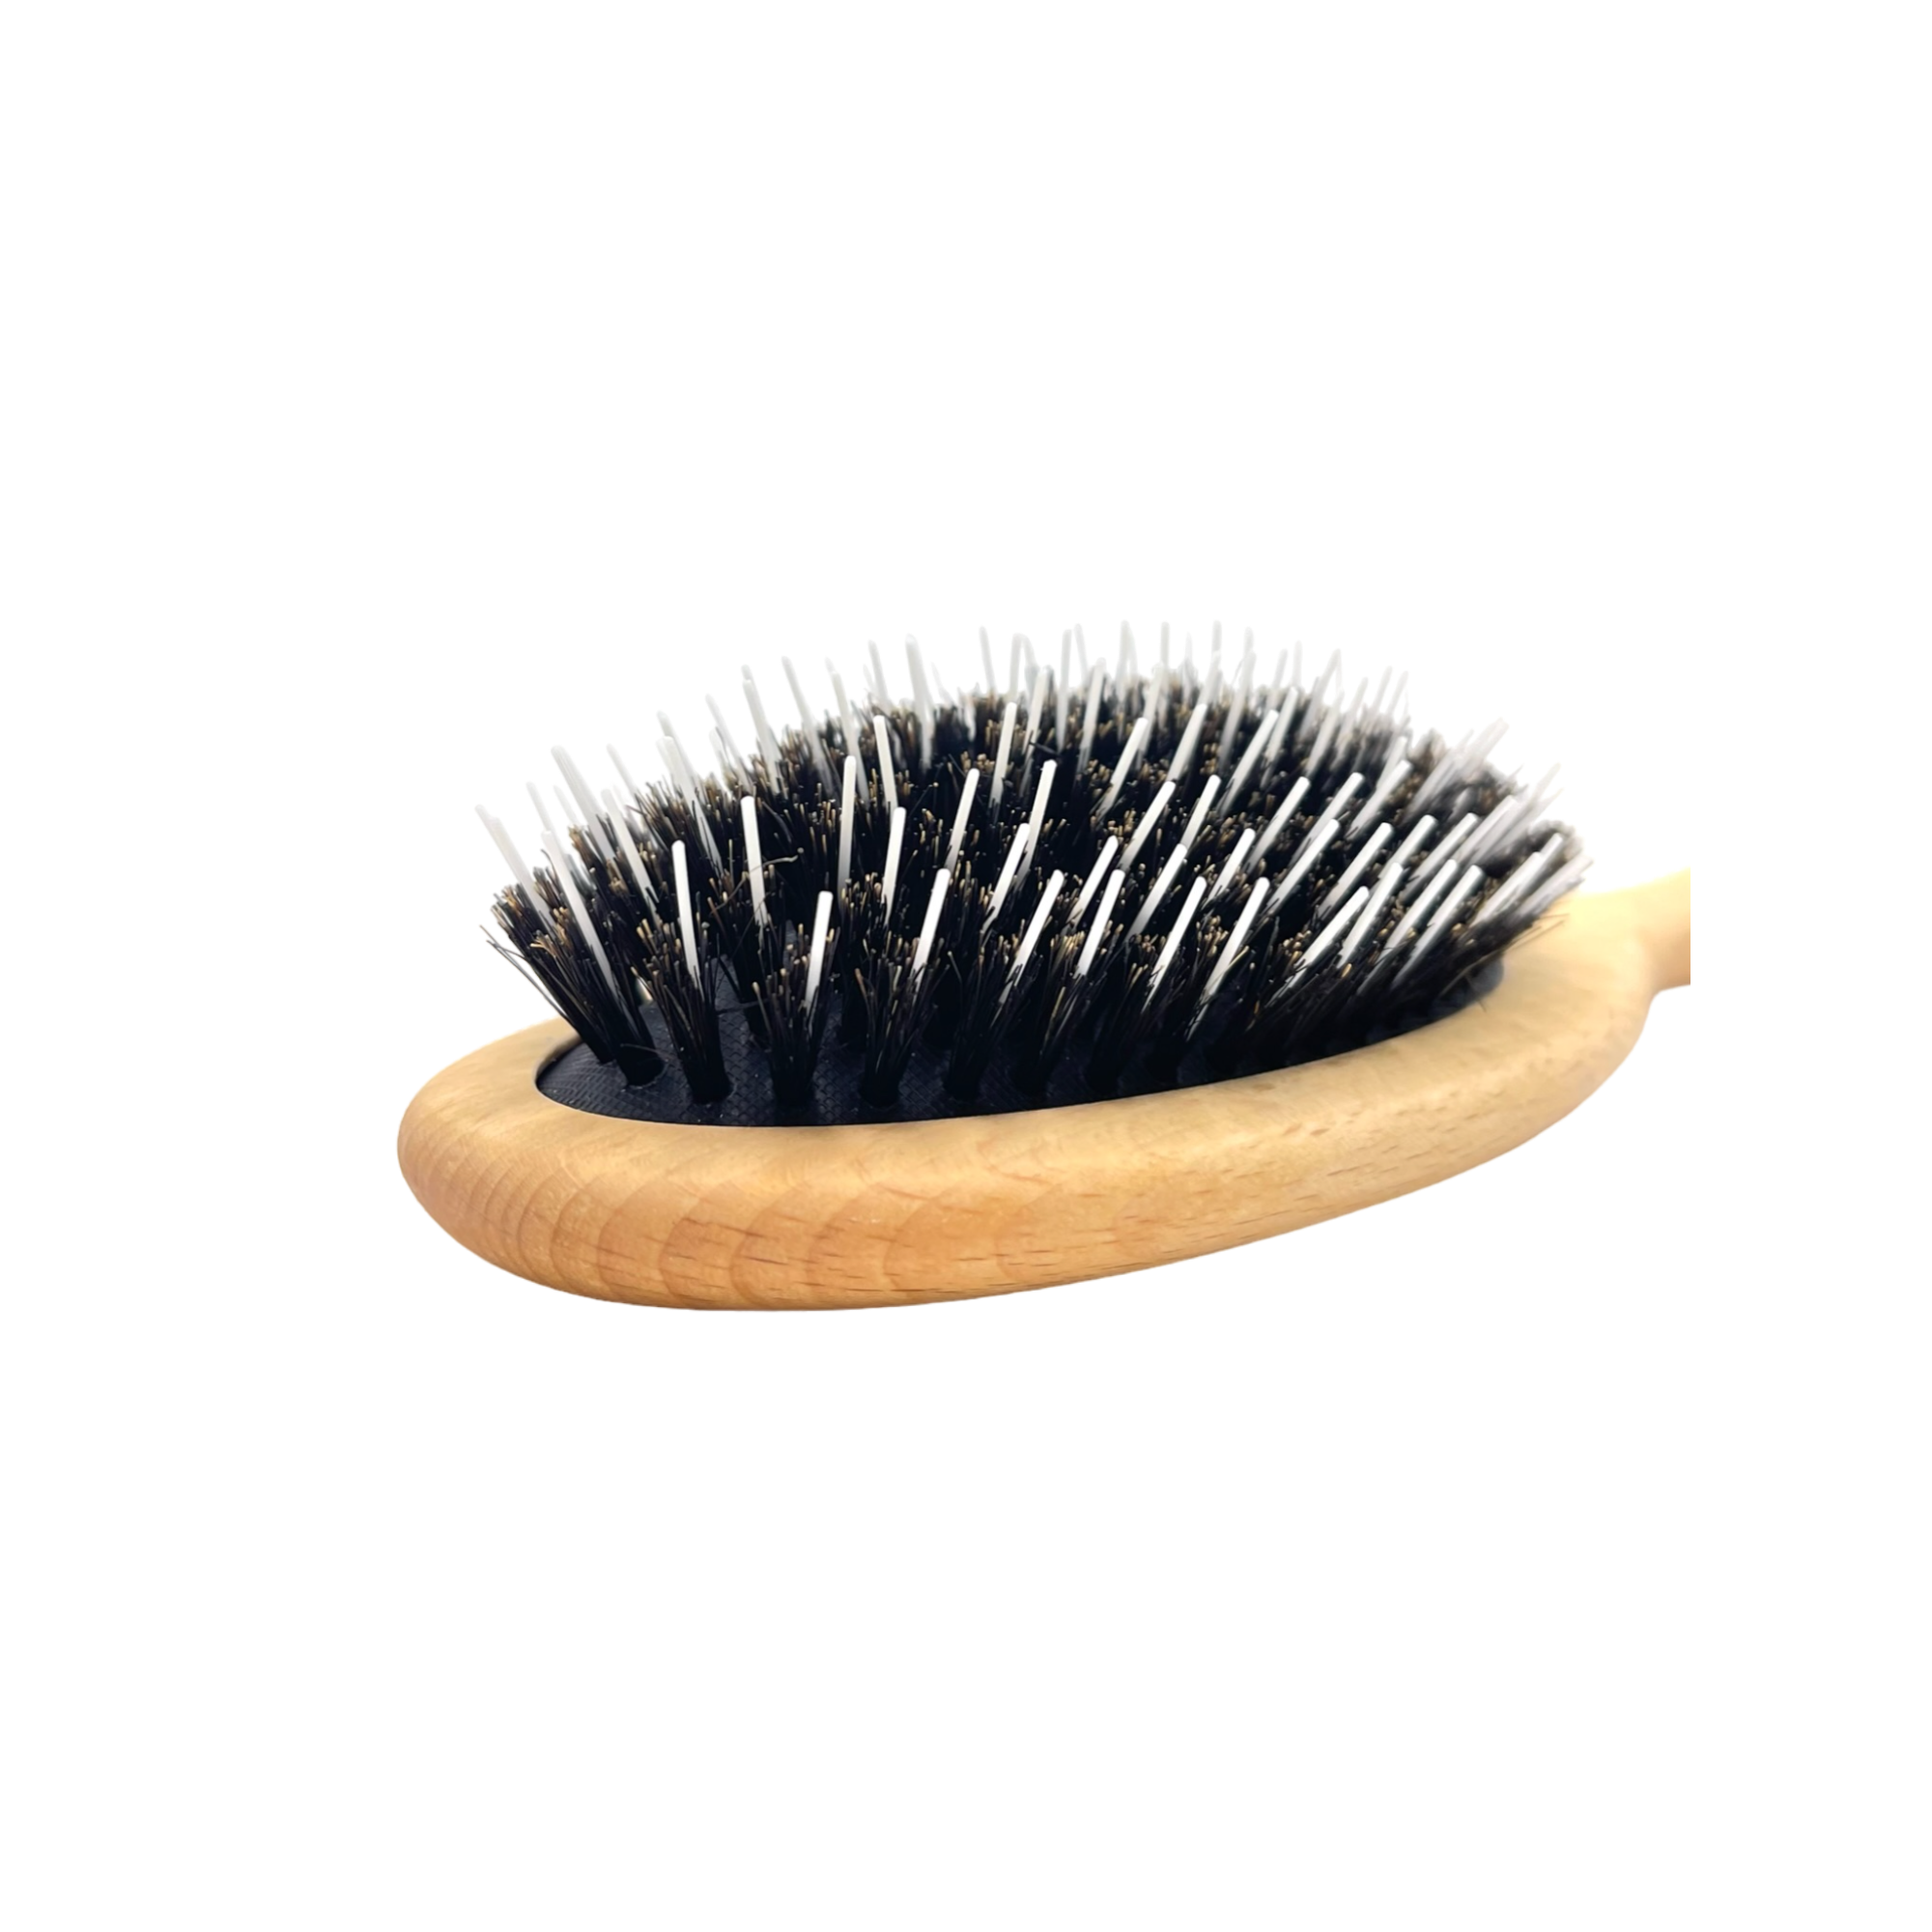 Dural Beech Wood rubber cushion hair brush with wild boar bristles and styling pins